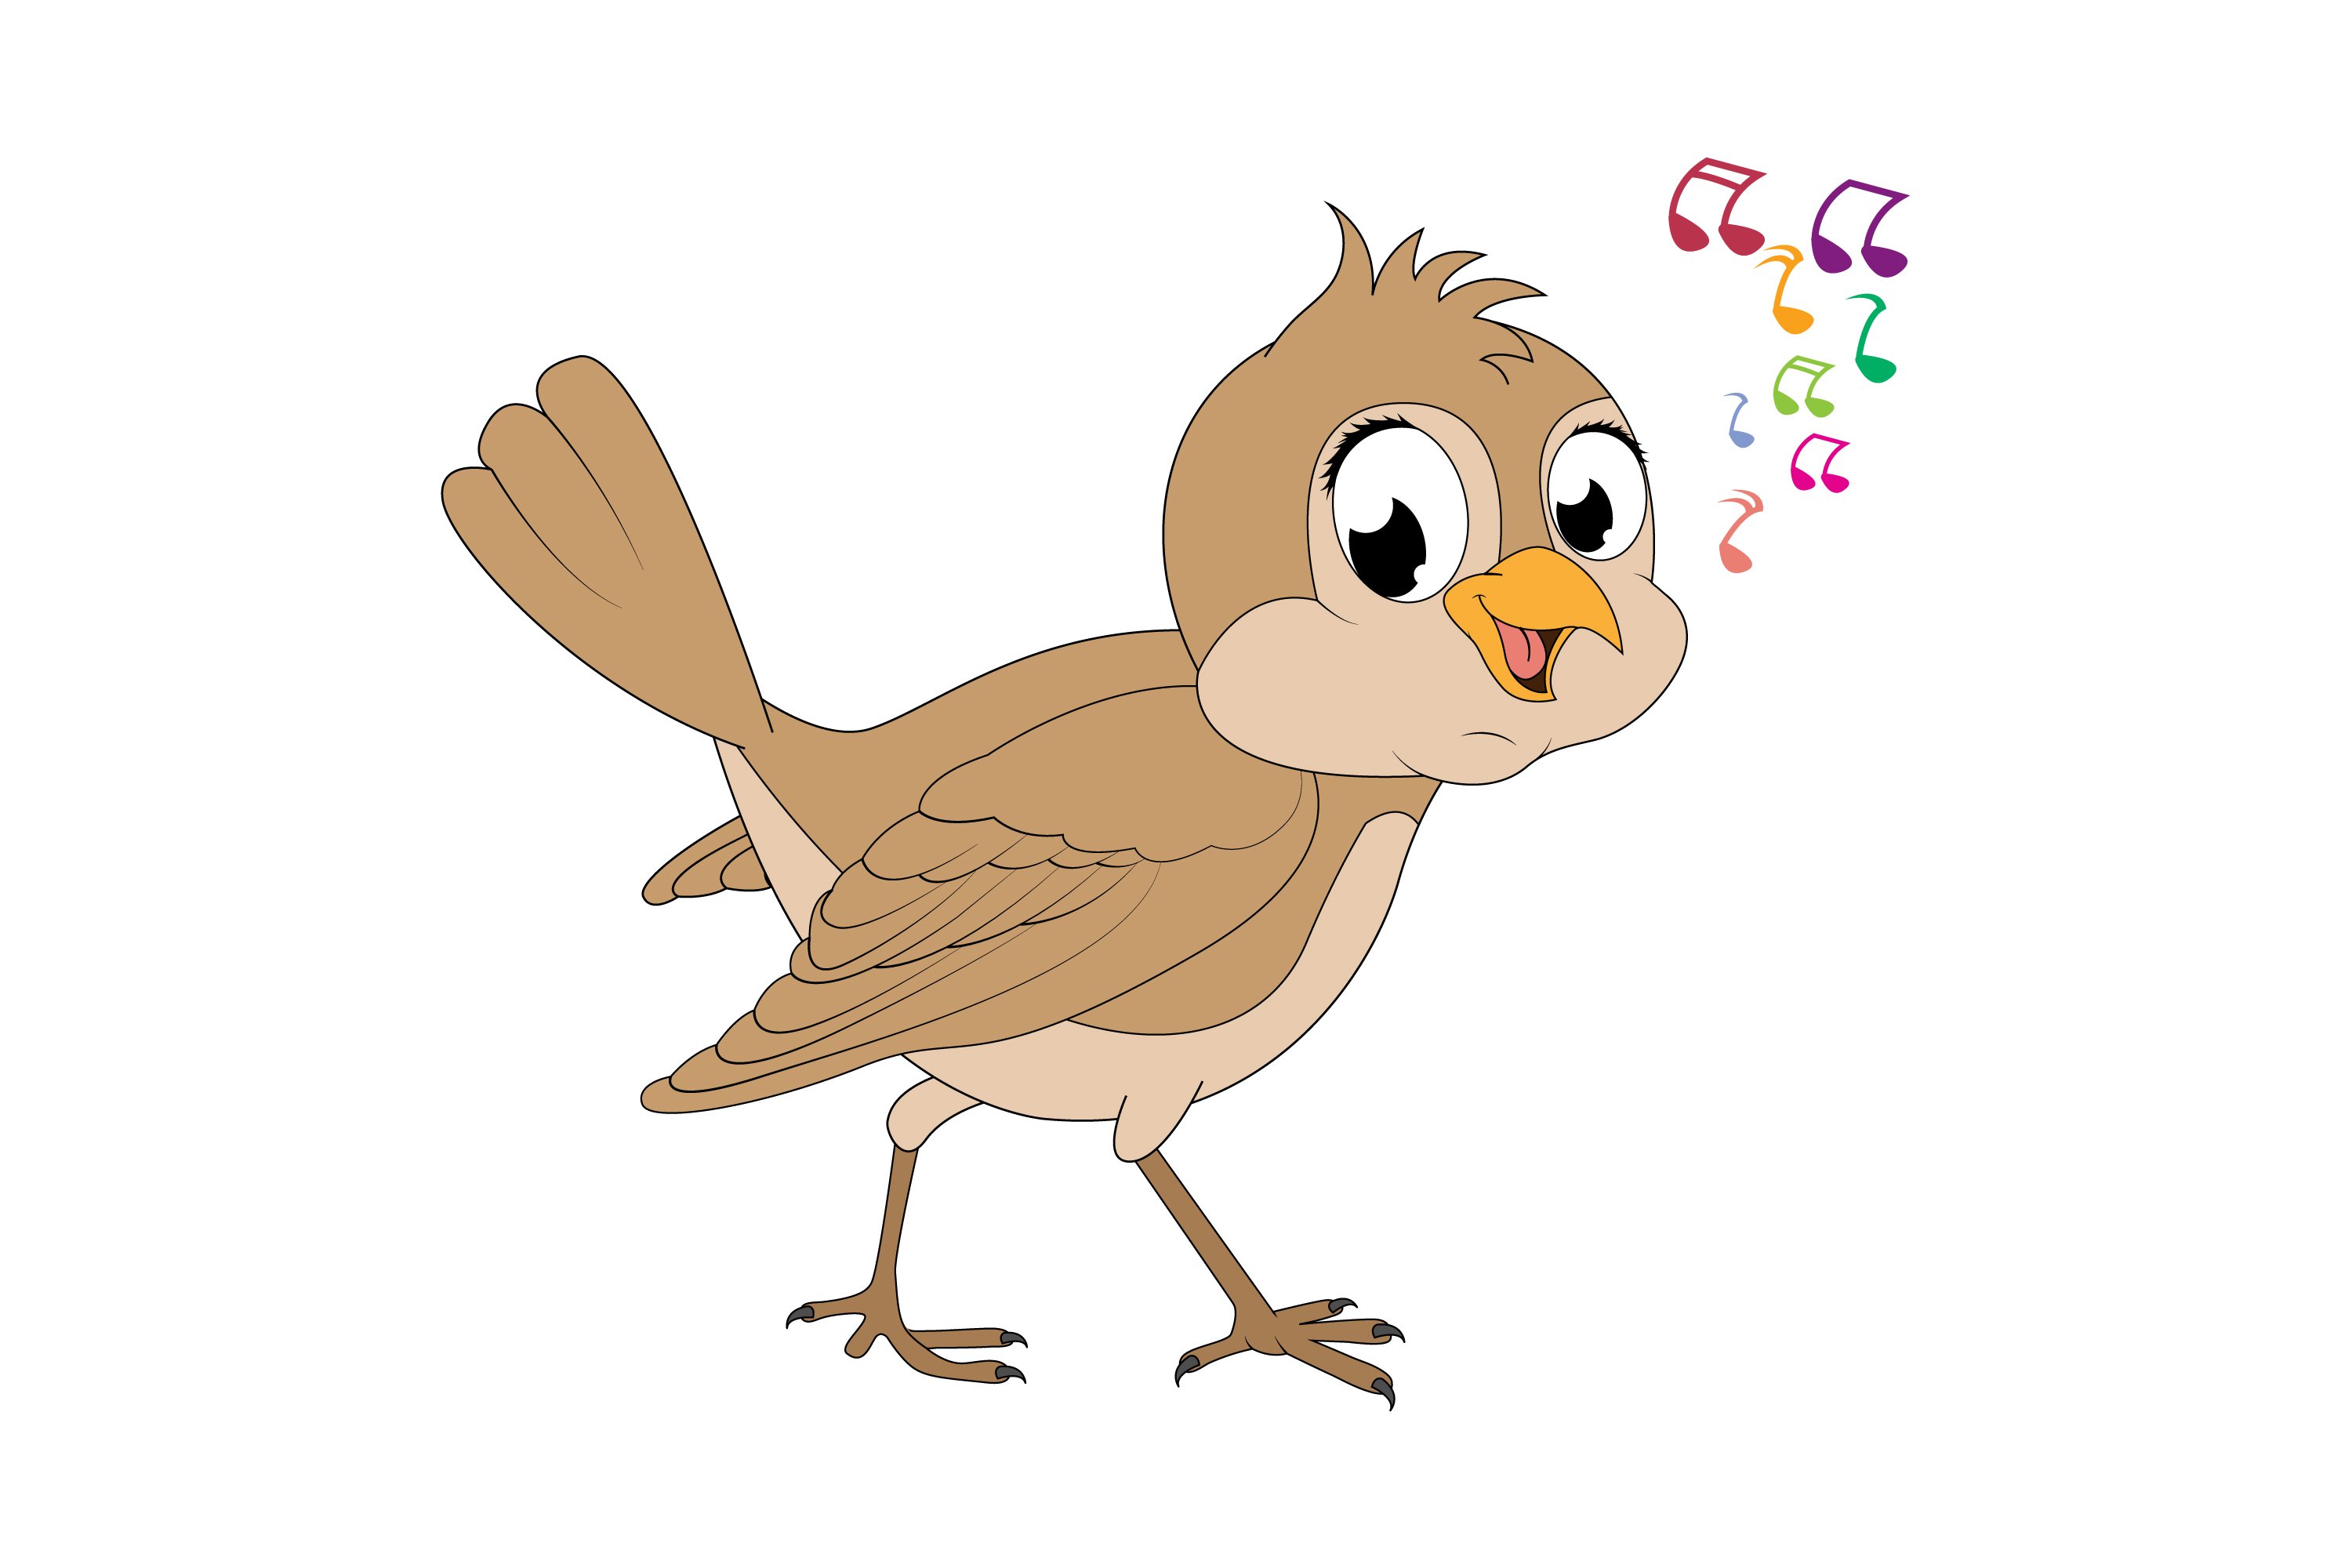 So cute and funny singing bird.